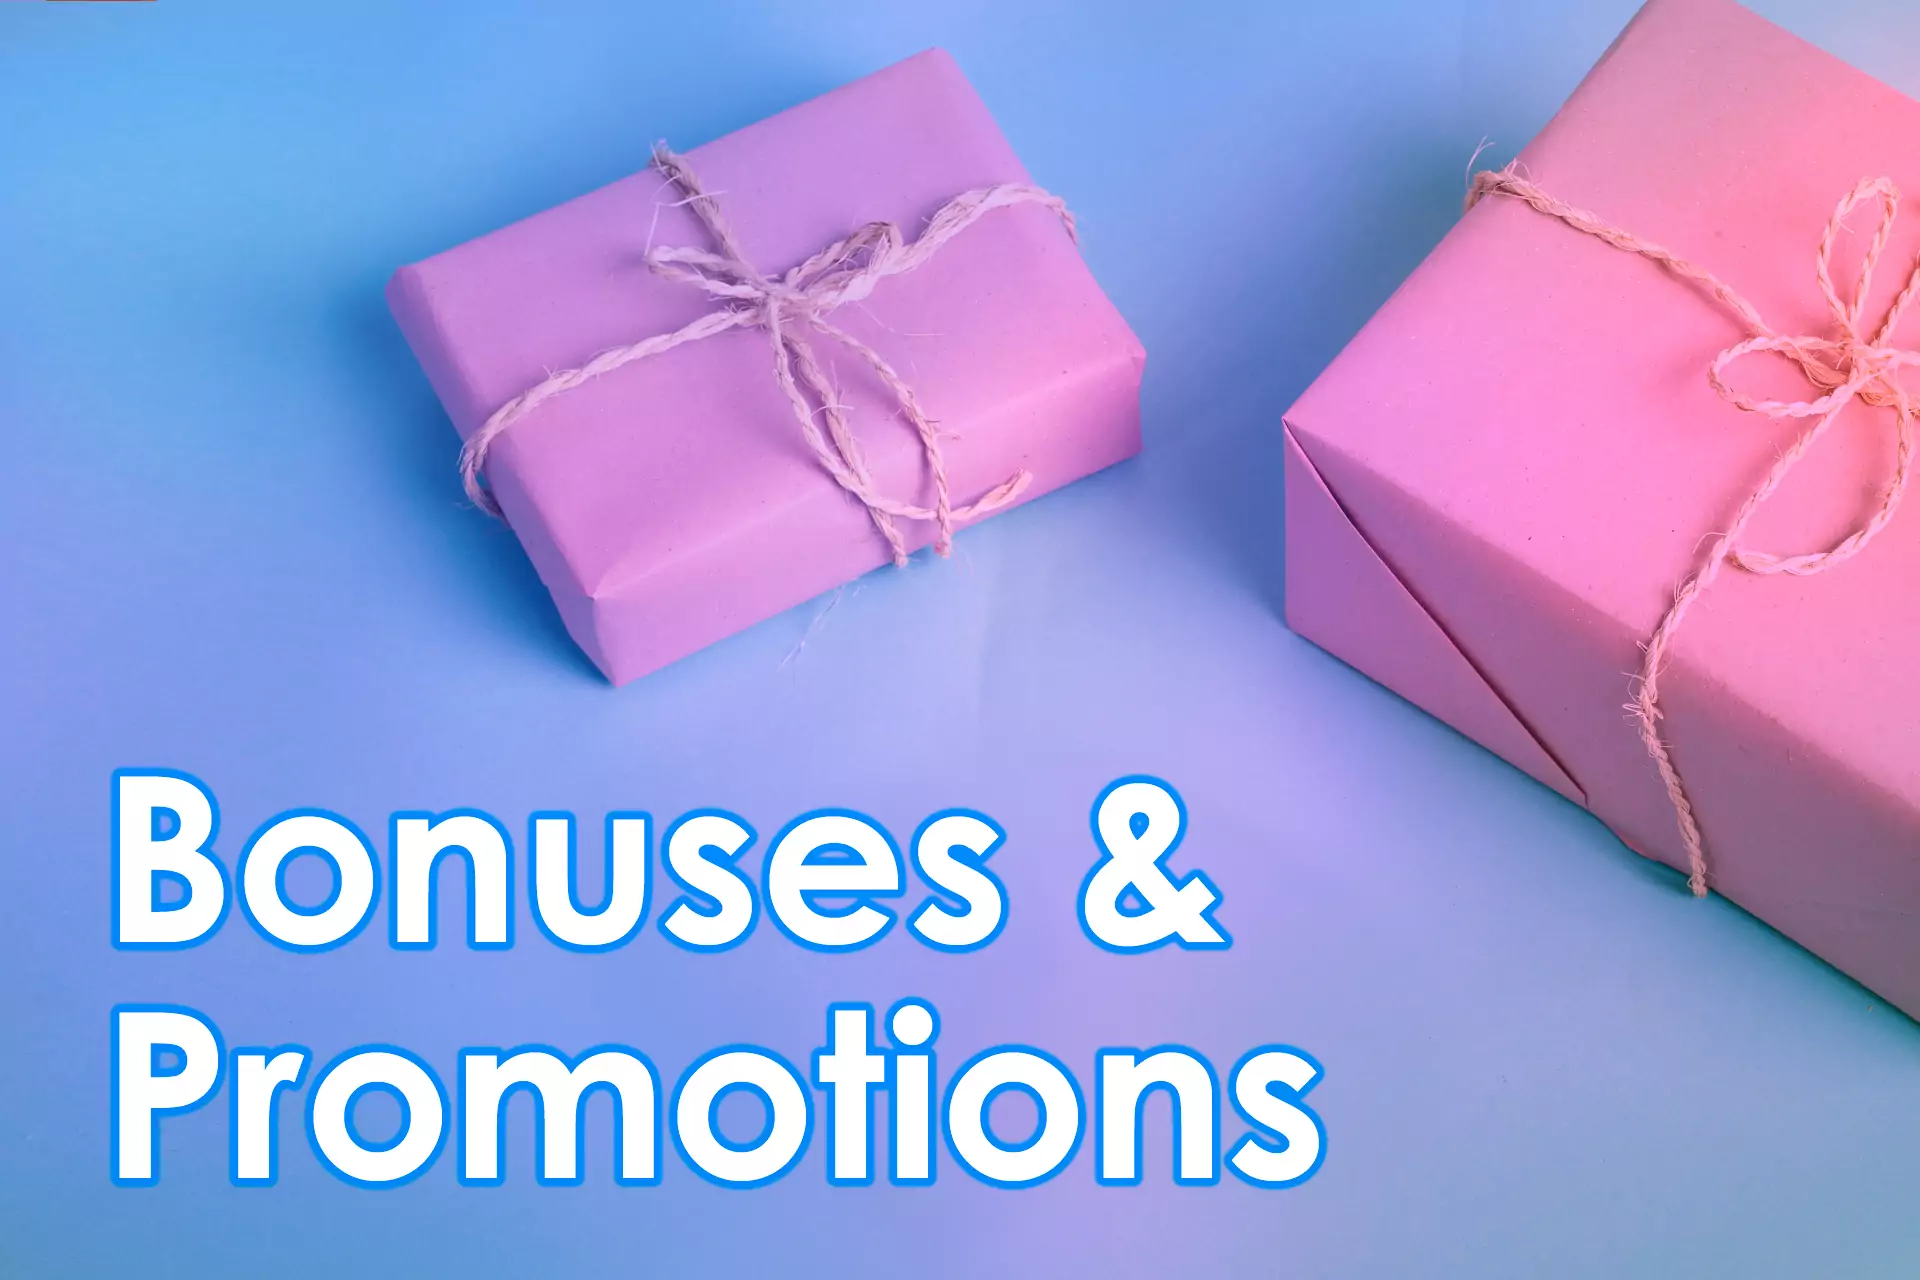 If you already have an account, check if there are any other actual bonuses or promotions for you.